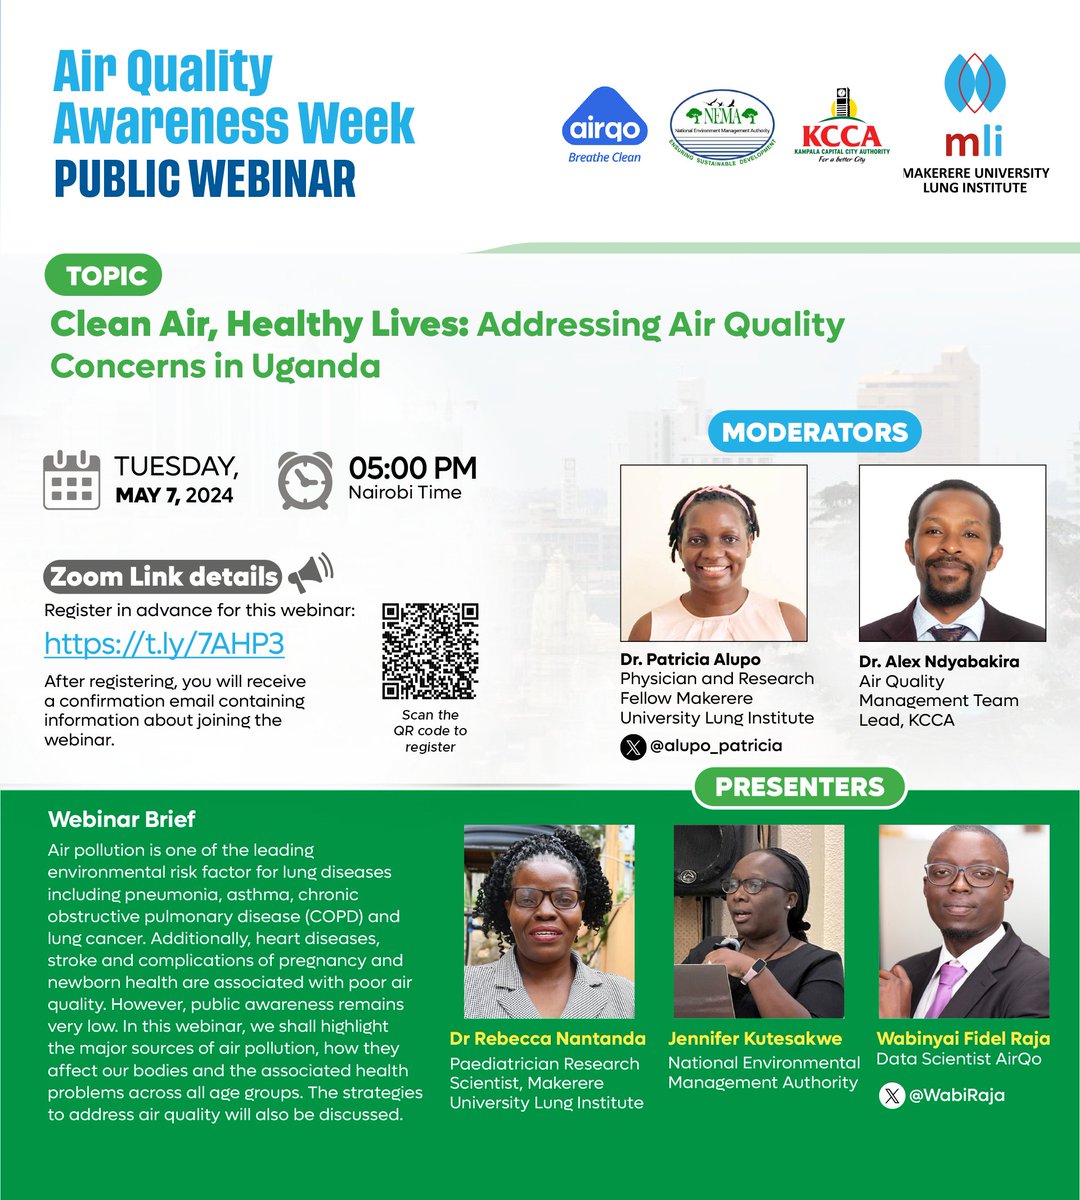 Join us for a timely public webinar TODAY at 5pm as part of Air Quality Awareness Week. We'll delve into 'Clean Air, Healthy Lives: Addressing Air Quality Concerns in Uganda.' Register now: t.ly/7AHP3 @nemaug @UgandaMediaCent @AirQoProject @KCCAUG @nbstv @ntvuganda